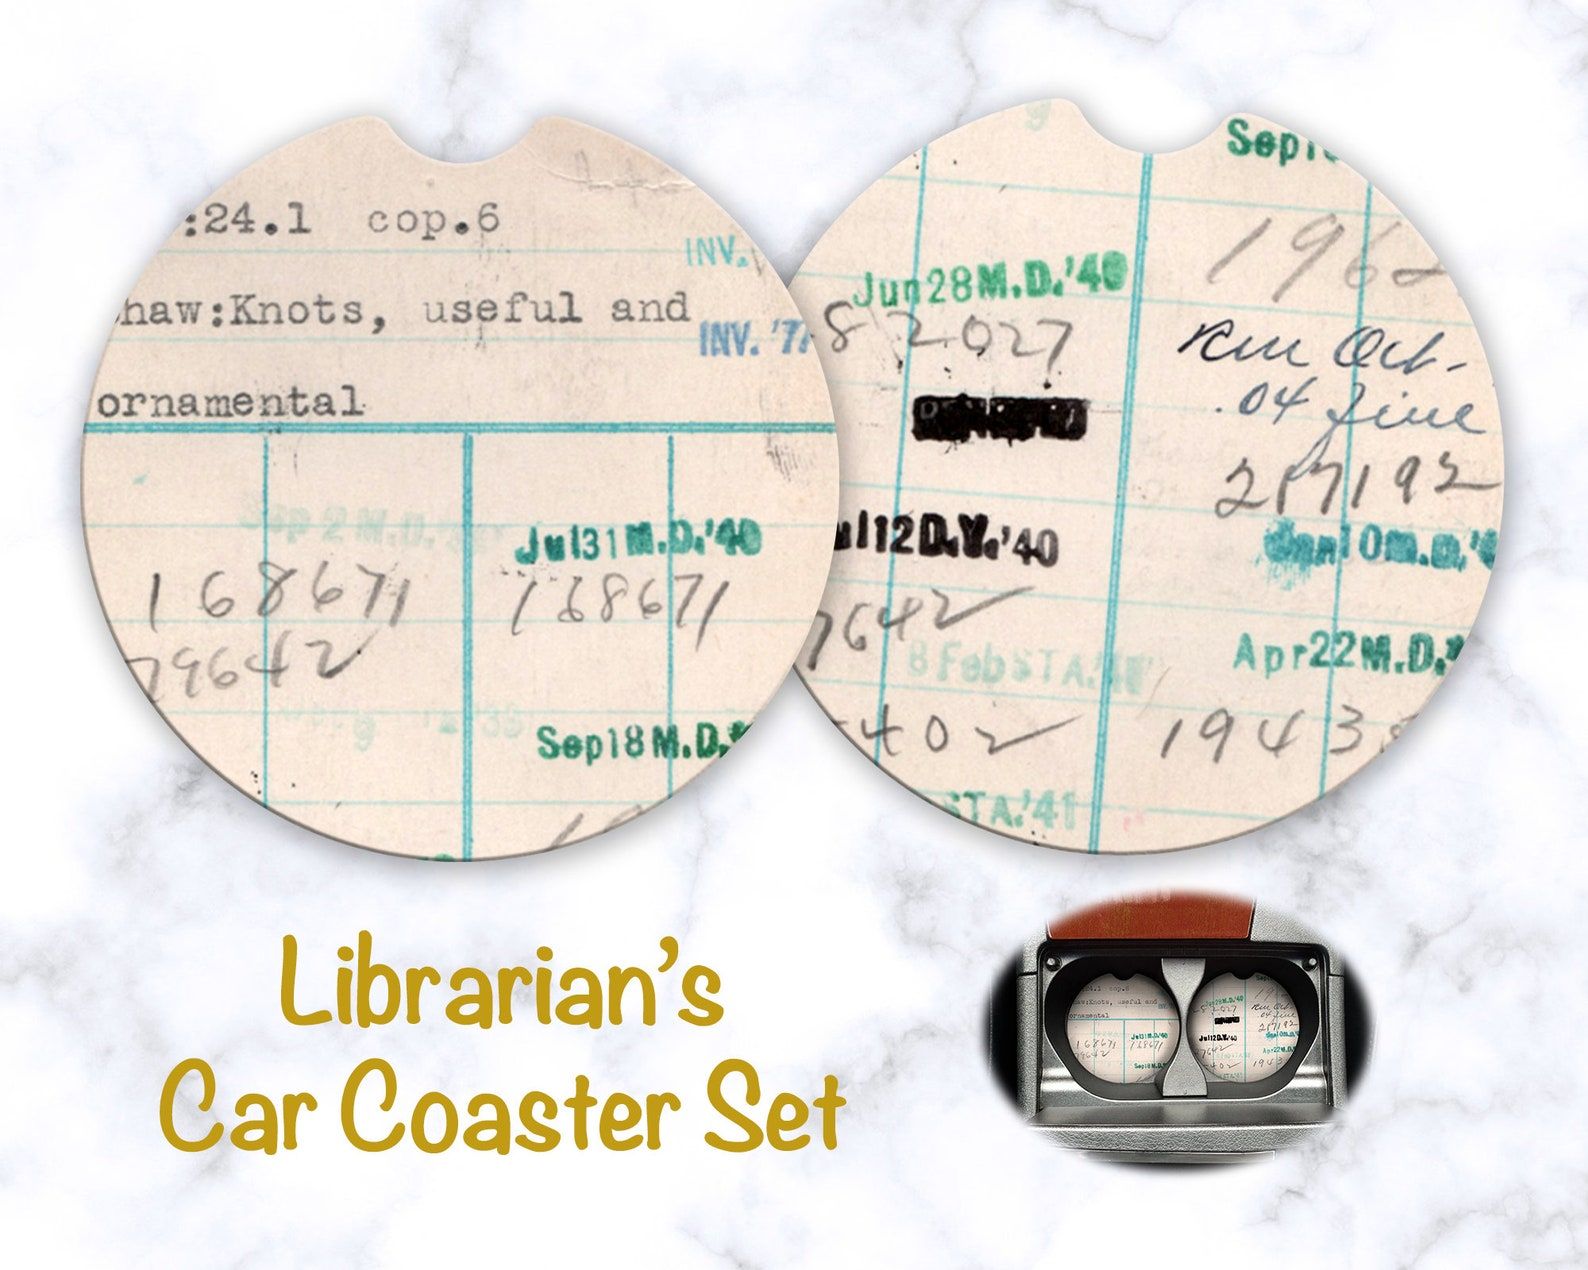 Two small coasters for a car. Both have an image of a library due date stamp. 